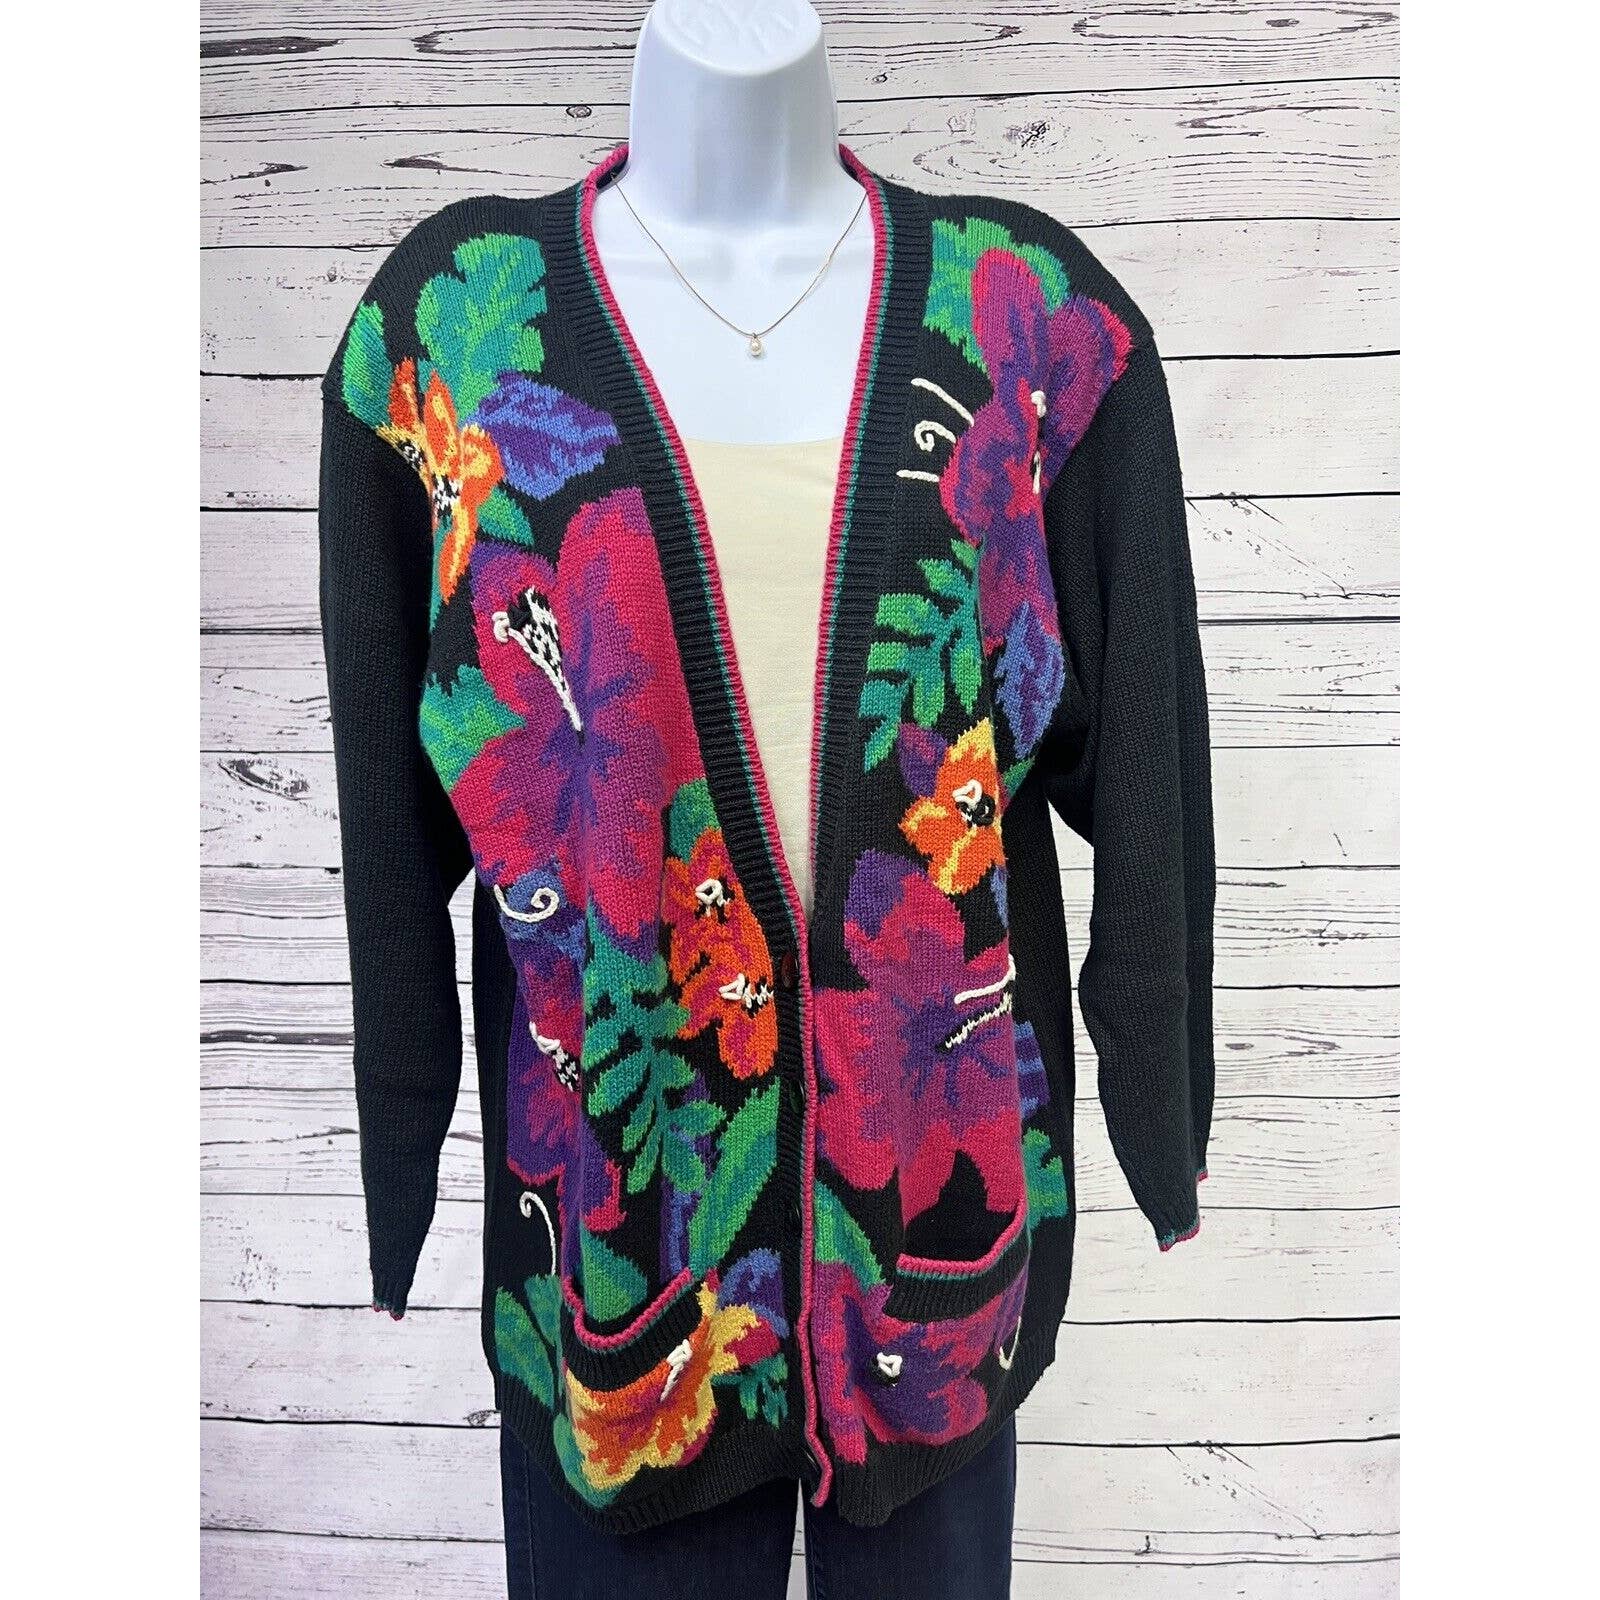 Jantzen Classics Cardigan Sweater Womens Large Embroidered By Hand Floral Black